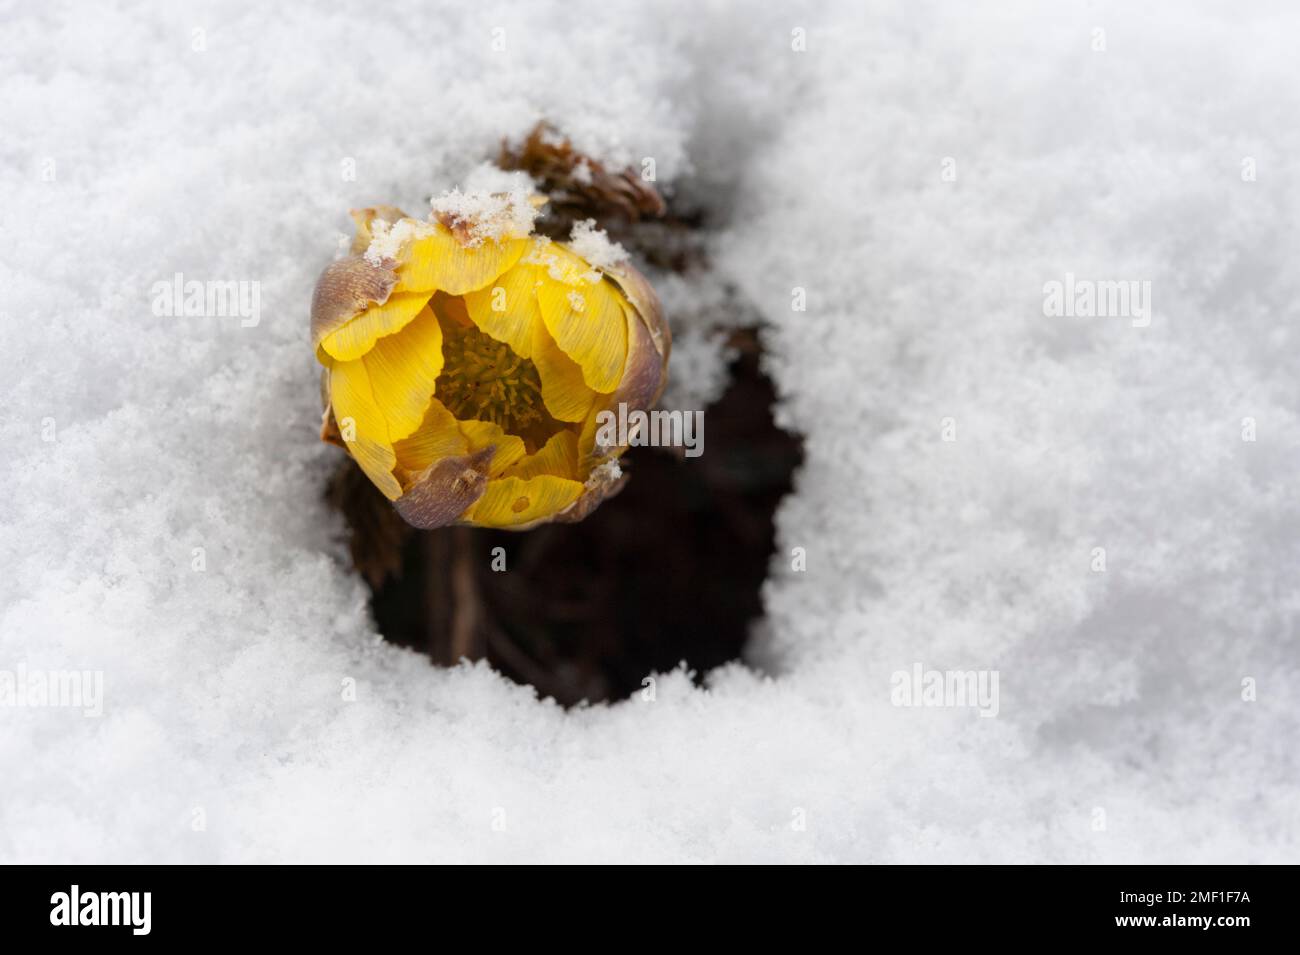 Amur adonis, known locally as fukujuso, blooming yellow in very early spring amidst fresh snow, Nagano, Japan. Stock Photo